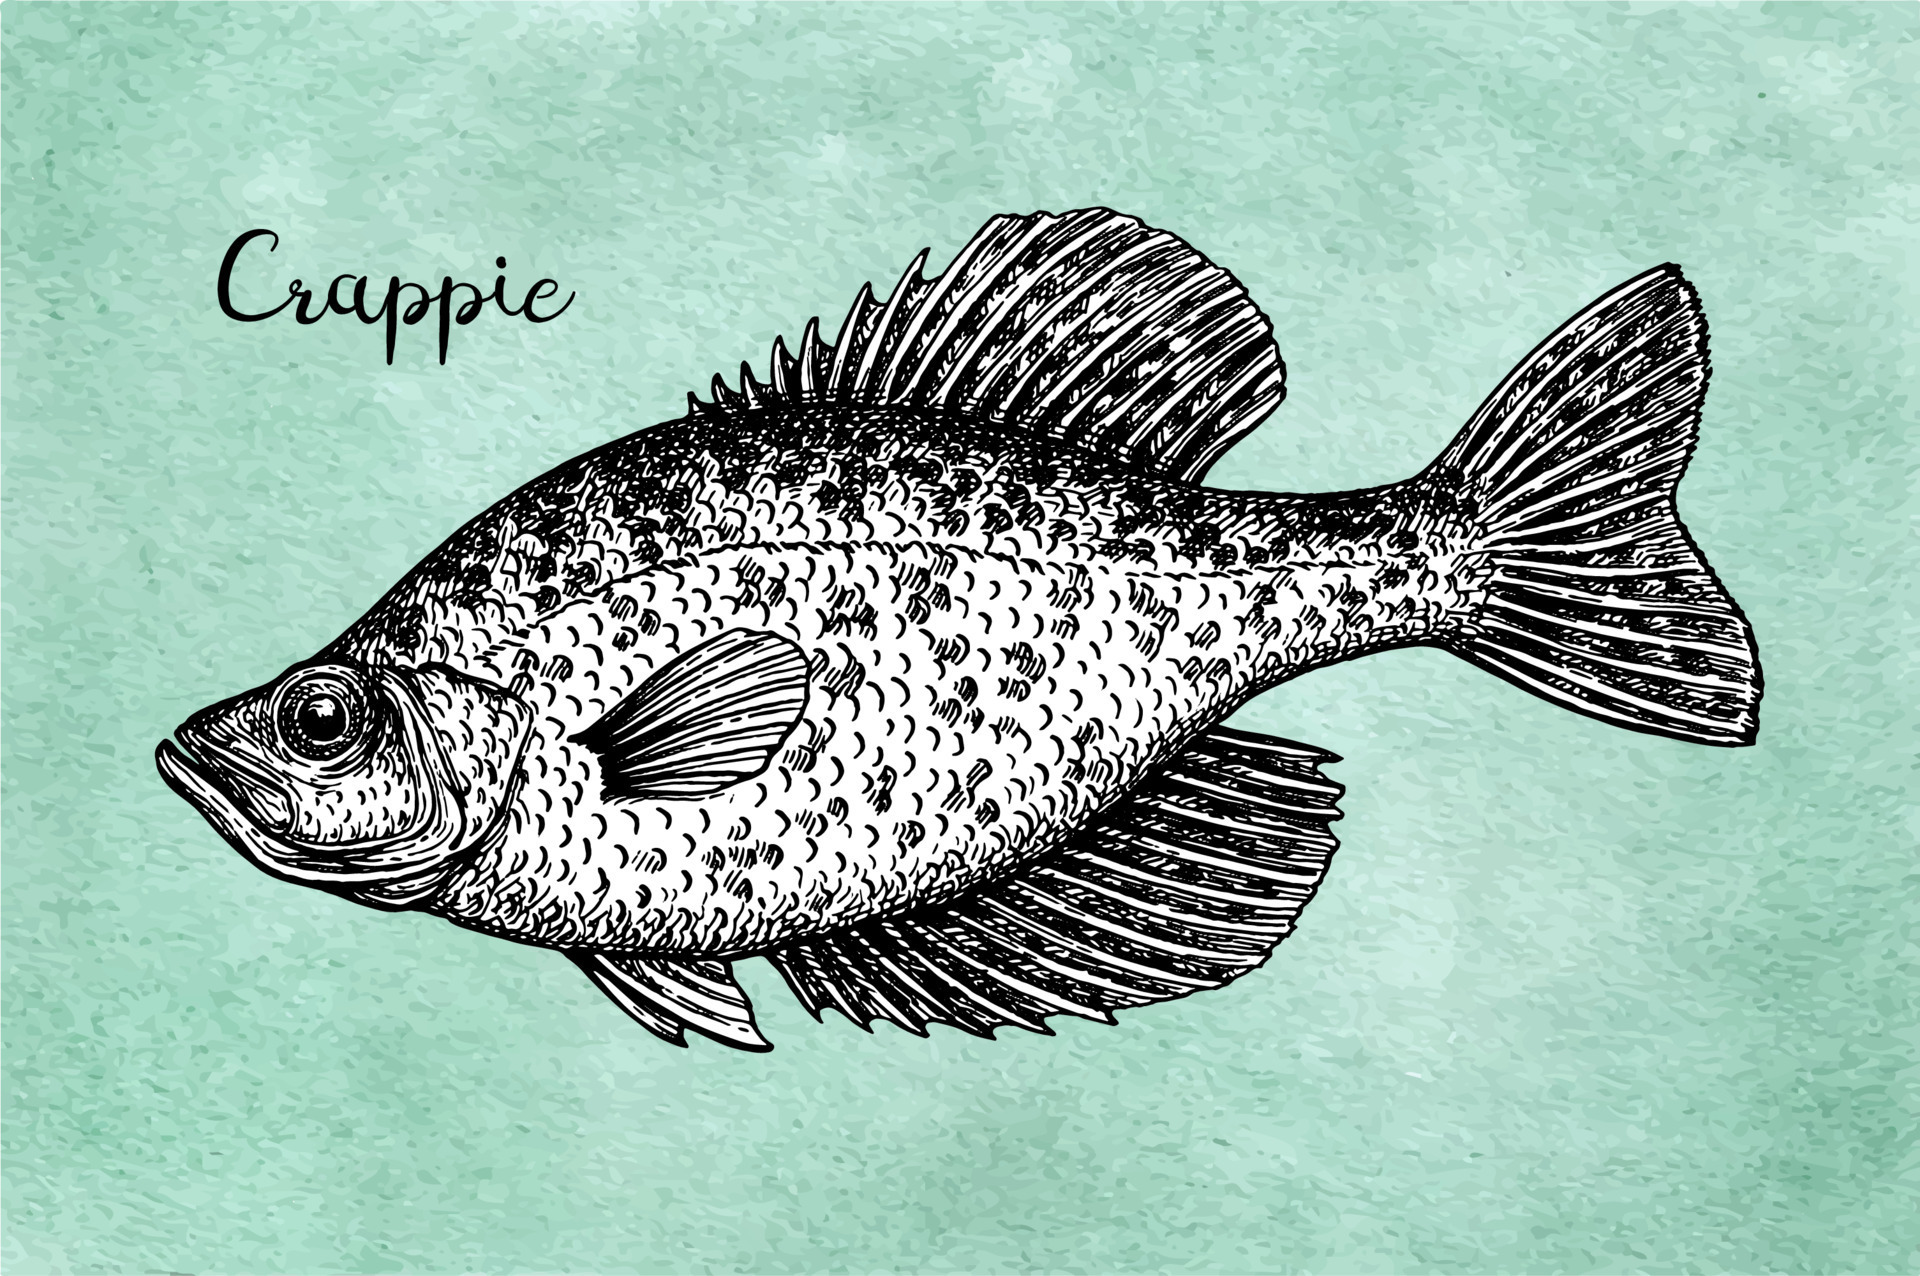 Crappie. Freshwater fish. Ink sketch on old paper background. Hand